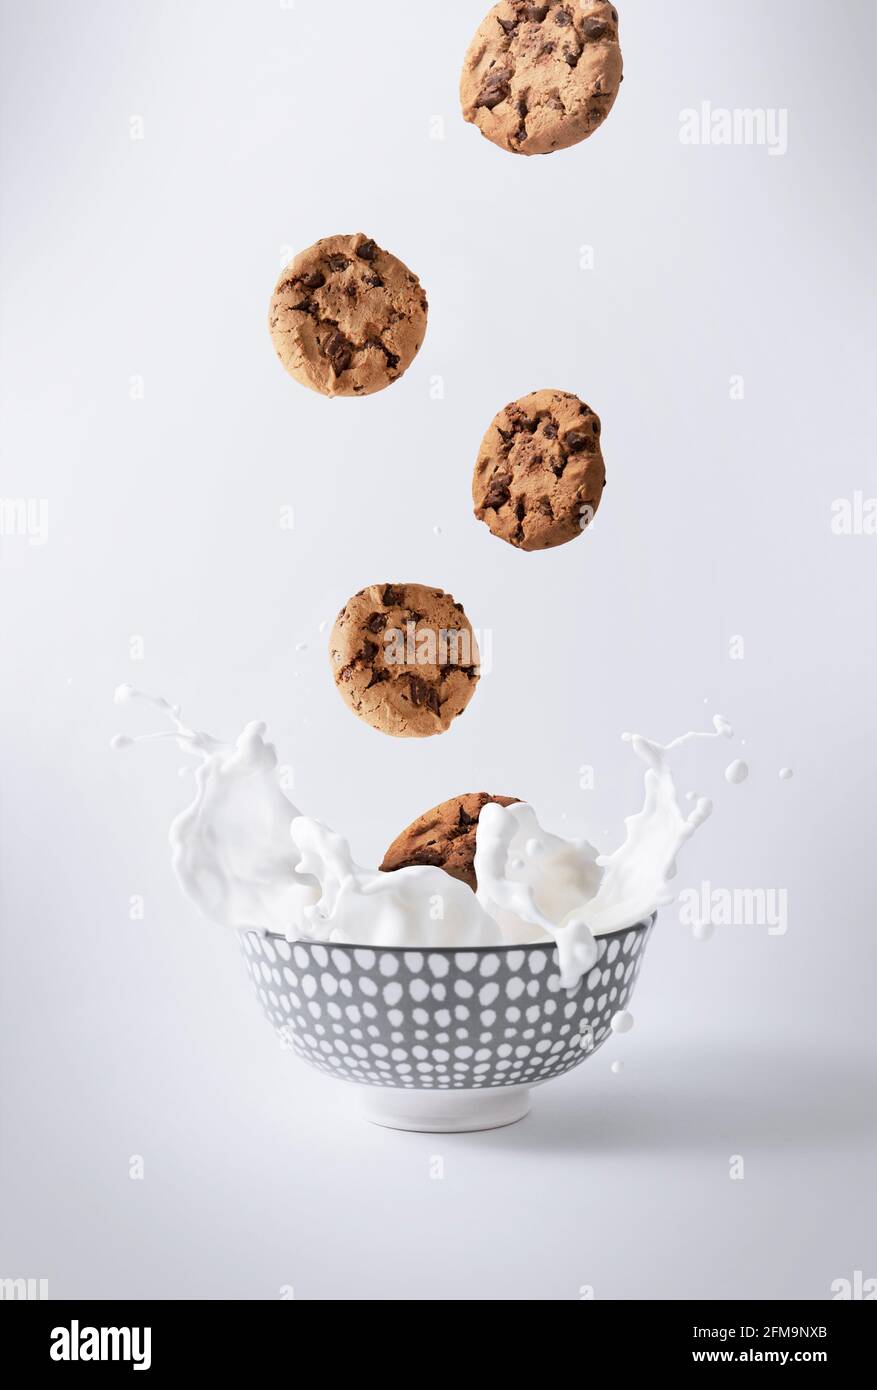 chocolate chip cookies, falling into white milk with splash on white background, vertical, cold and light colors Stock Photo